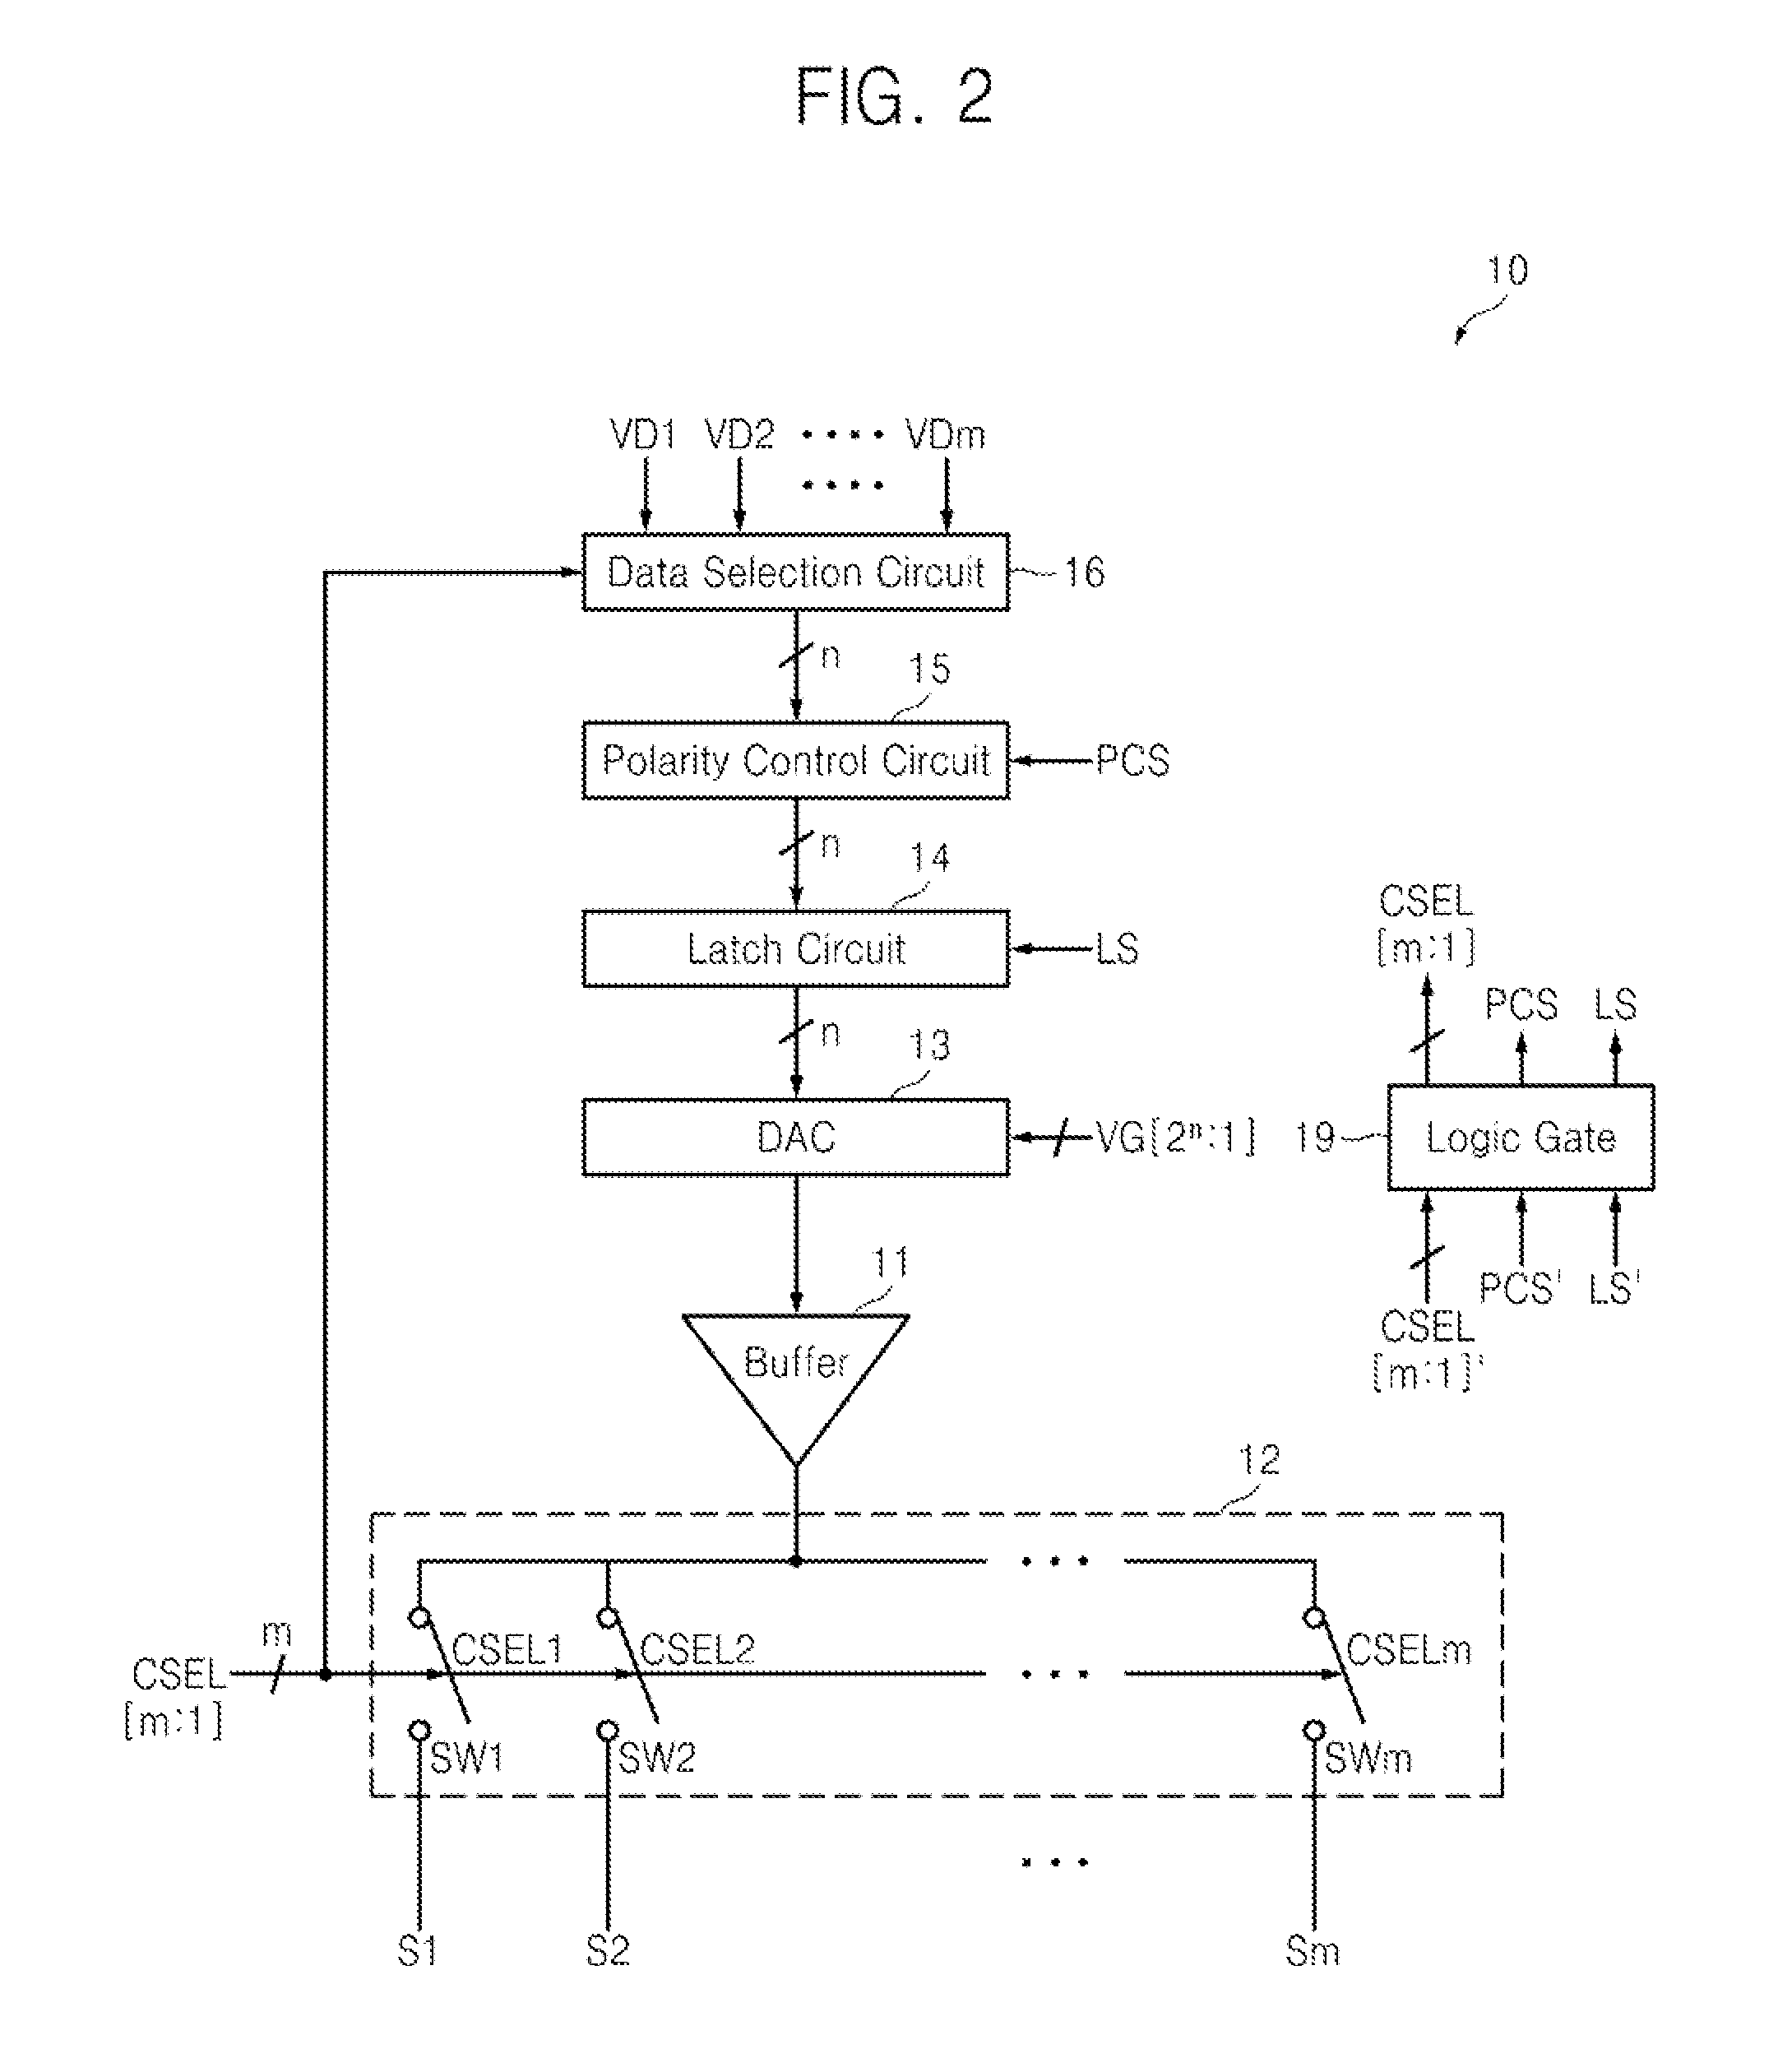 Source Driver and Display Device Having the Same